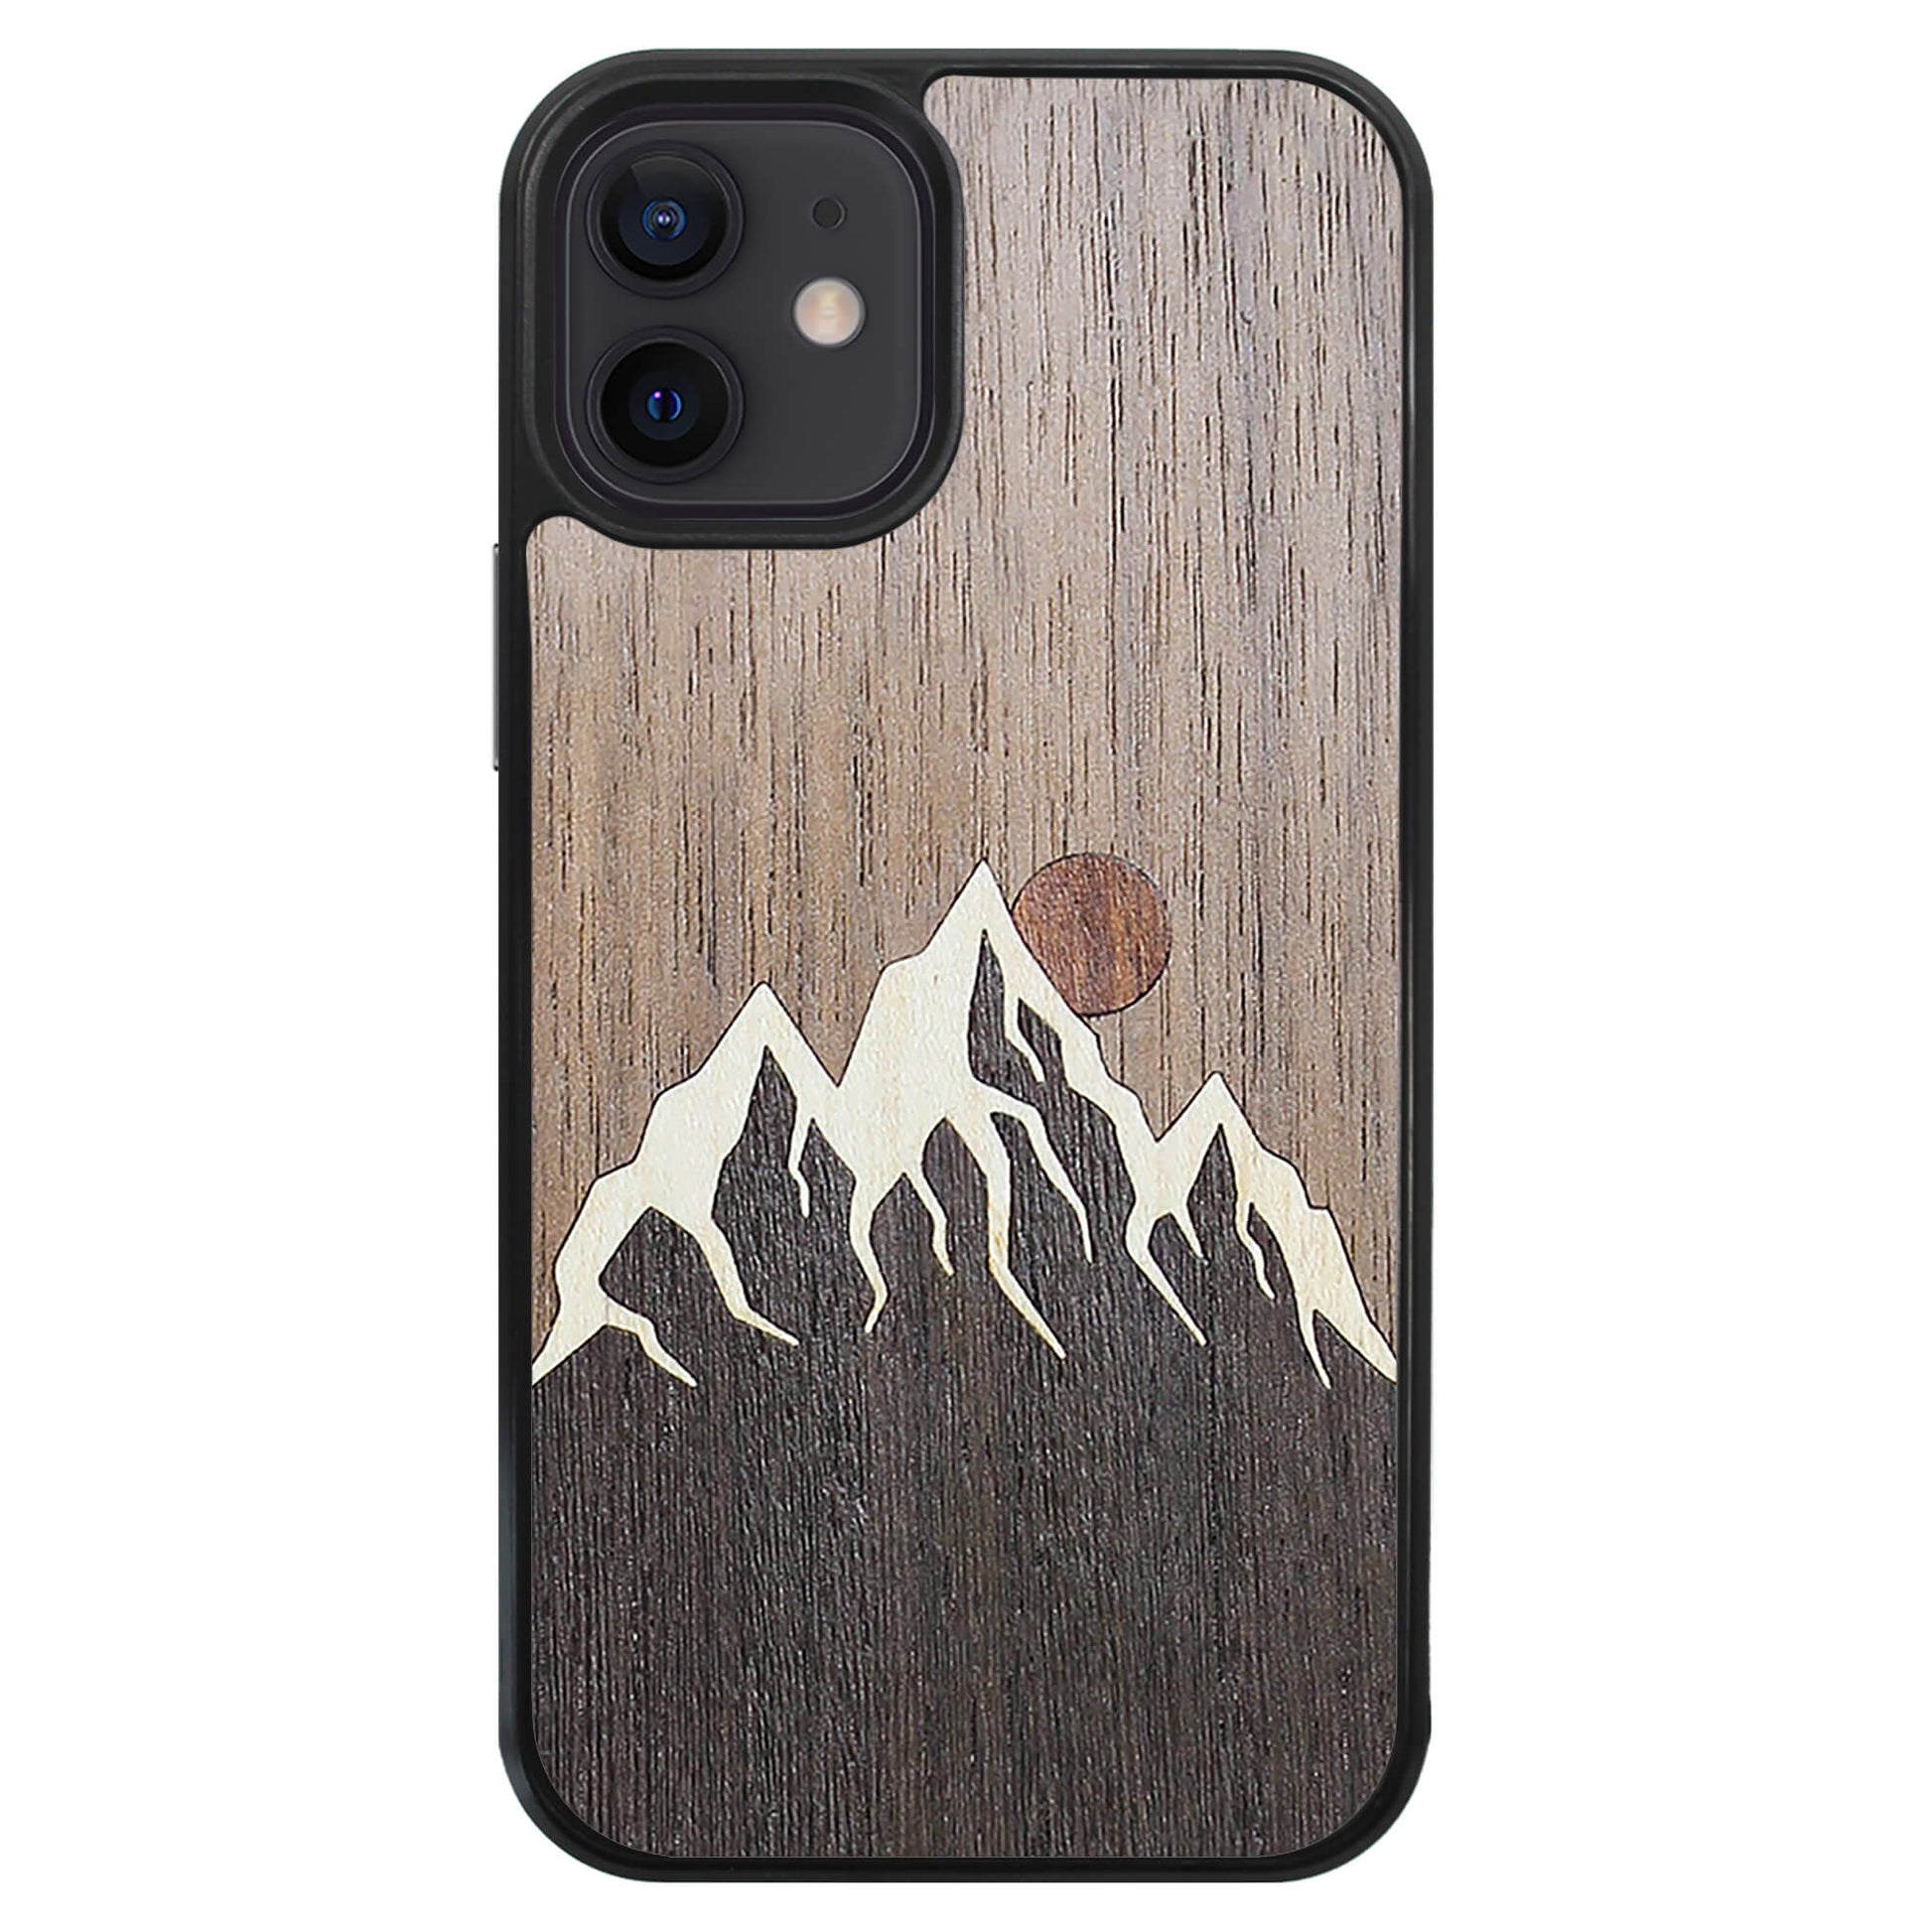 Wooden Case for iPhone 12 Mini Mountain